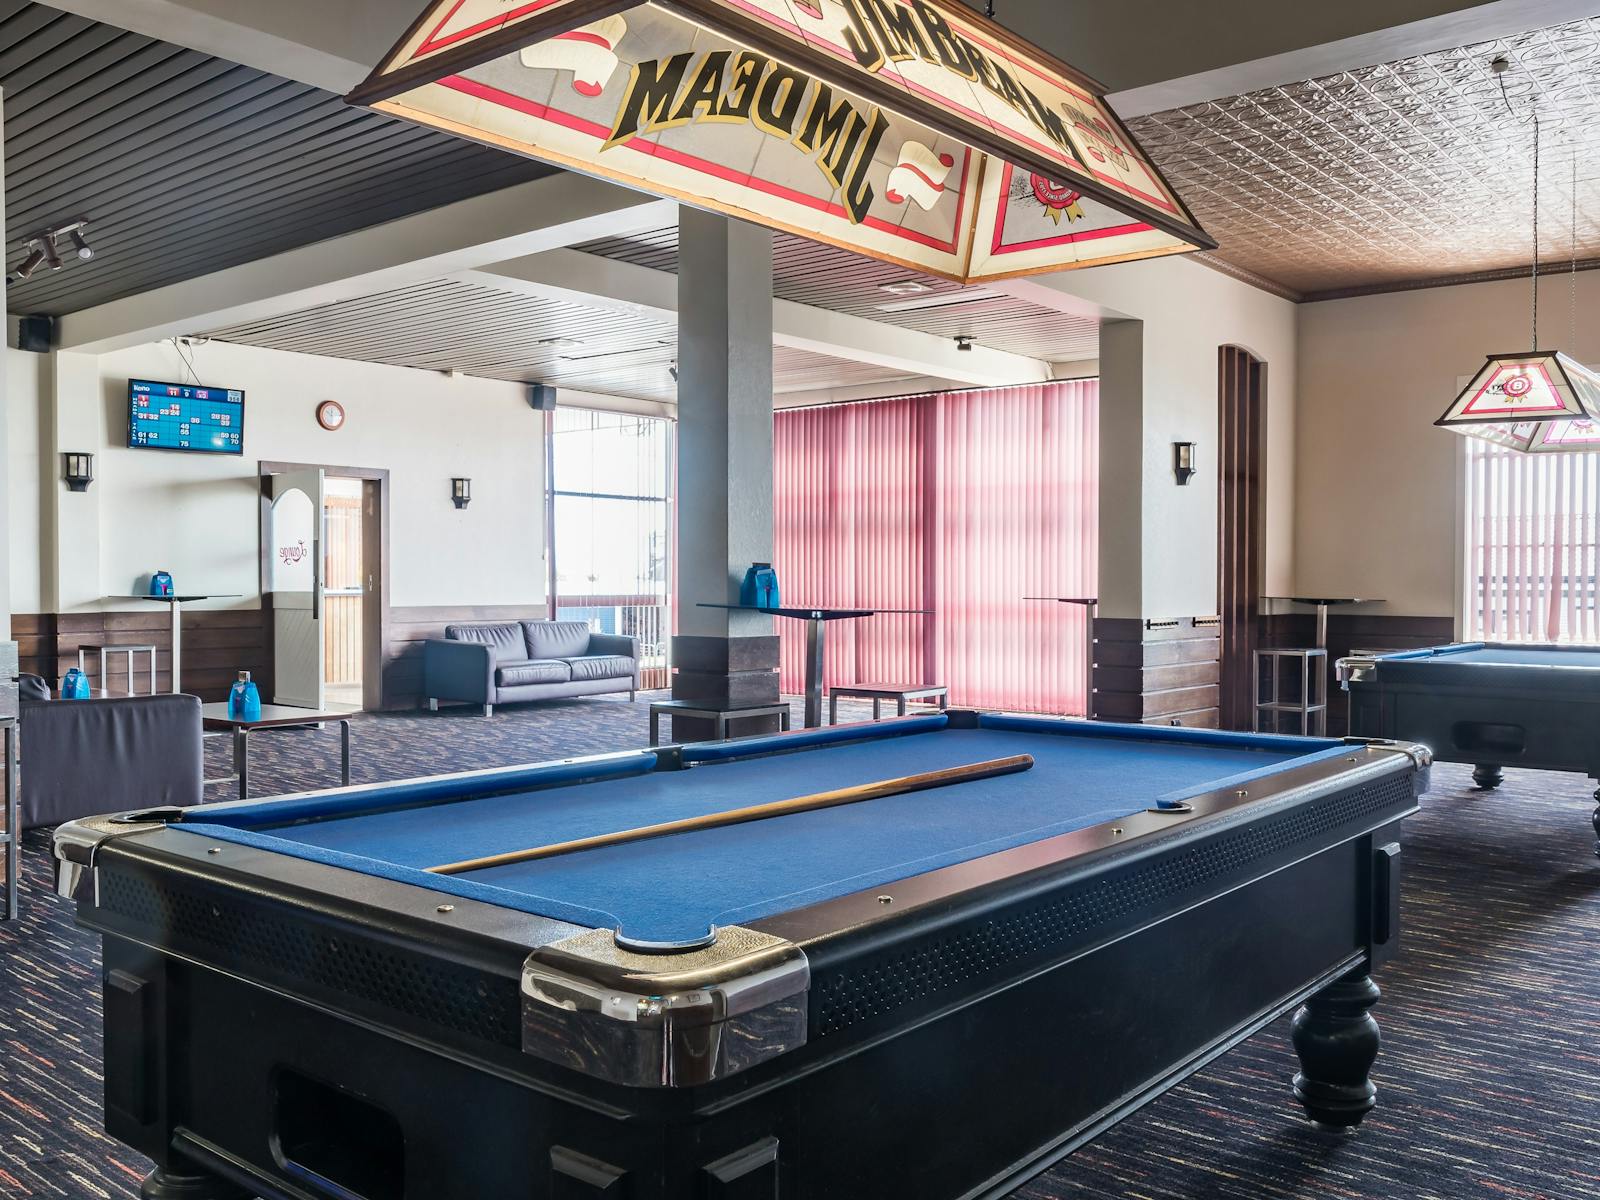 8 Ball tables in pool room and lounge